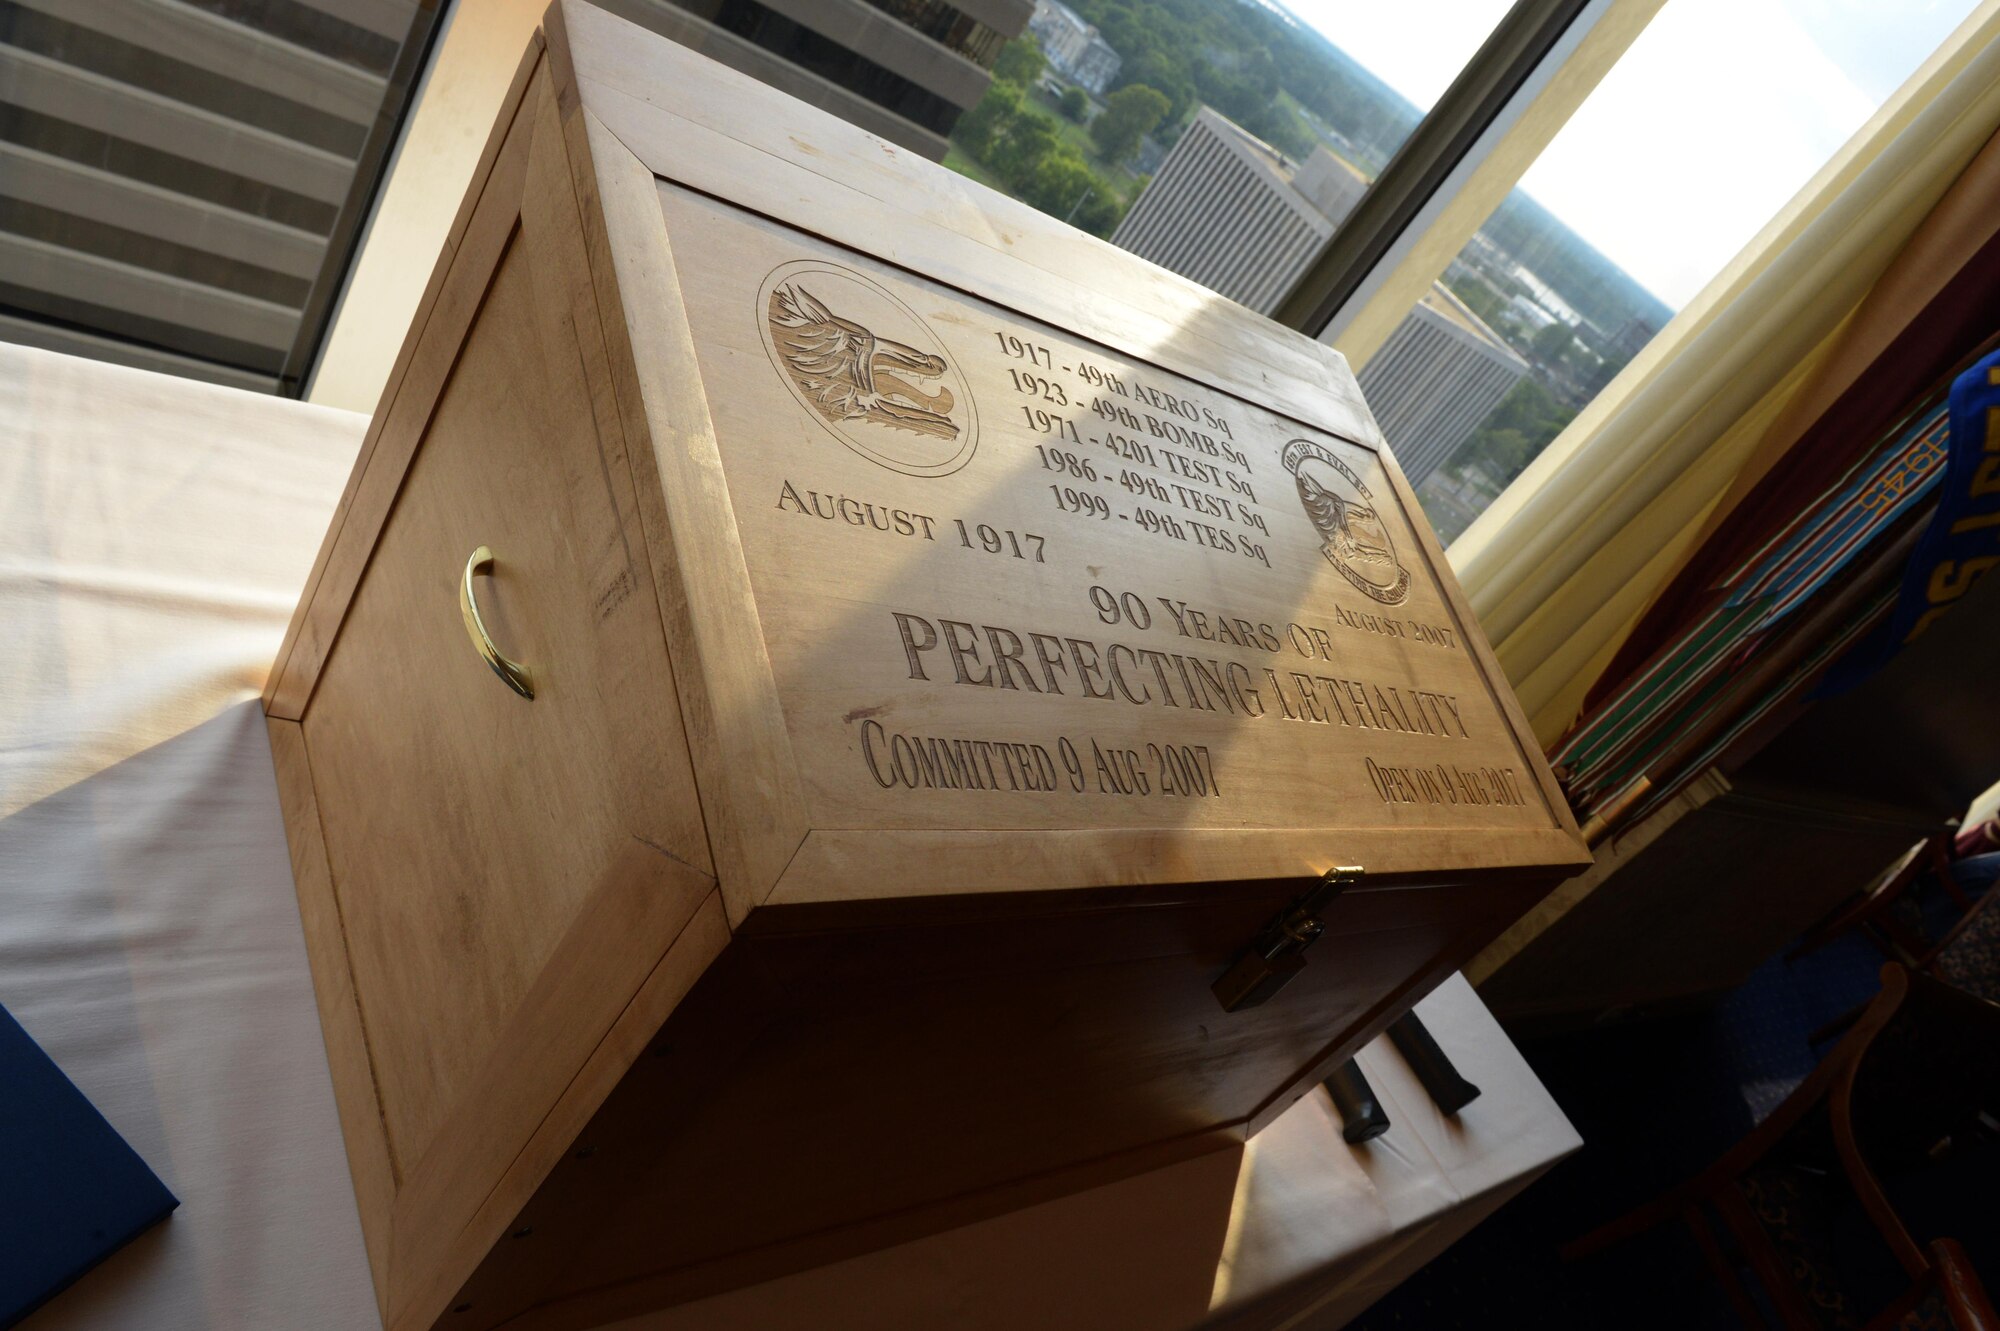 A time capsule honoring the 49th Test and Evaluations Squadron is displayed at the Petroleum Club in Shreveport, La., Aug. 5, 2017. The capsule was created and put together by members of the 49th TES on Aug. 9, 2007, with instructions to be opened on its 100th birthday. (U.S. Air Force Photo/Senior Airman Curt Beach)